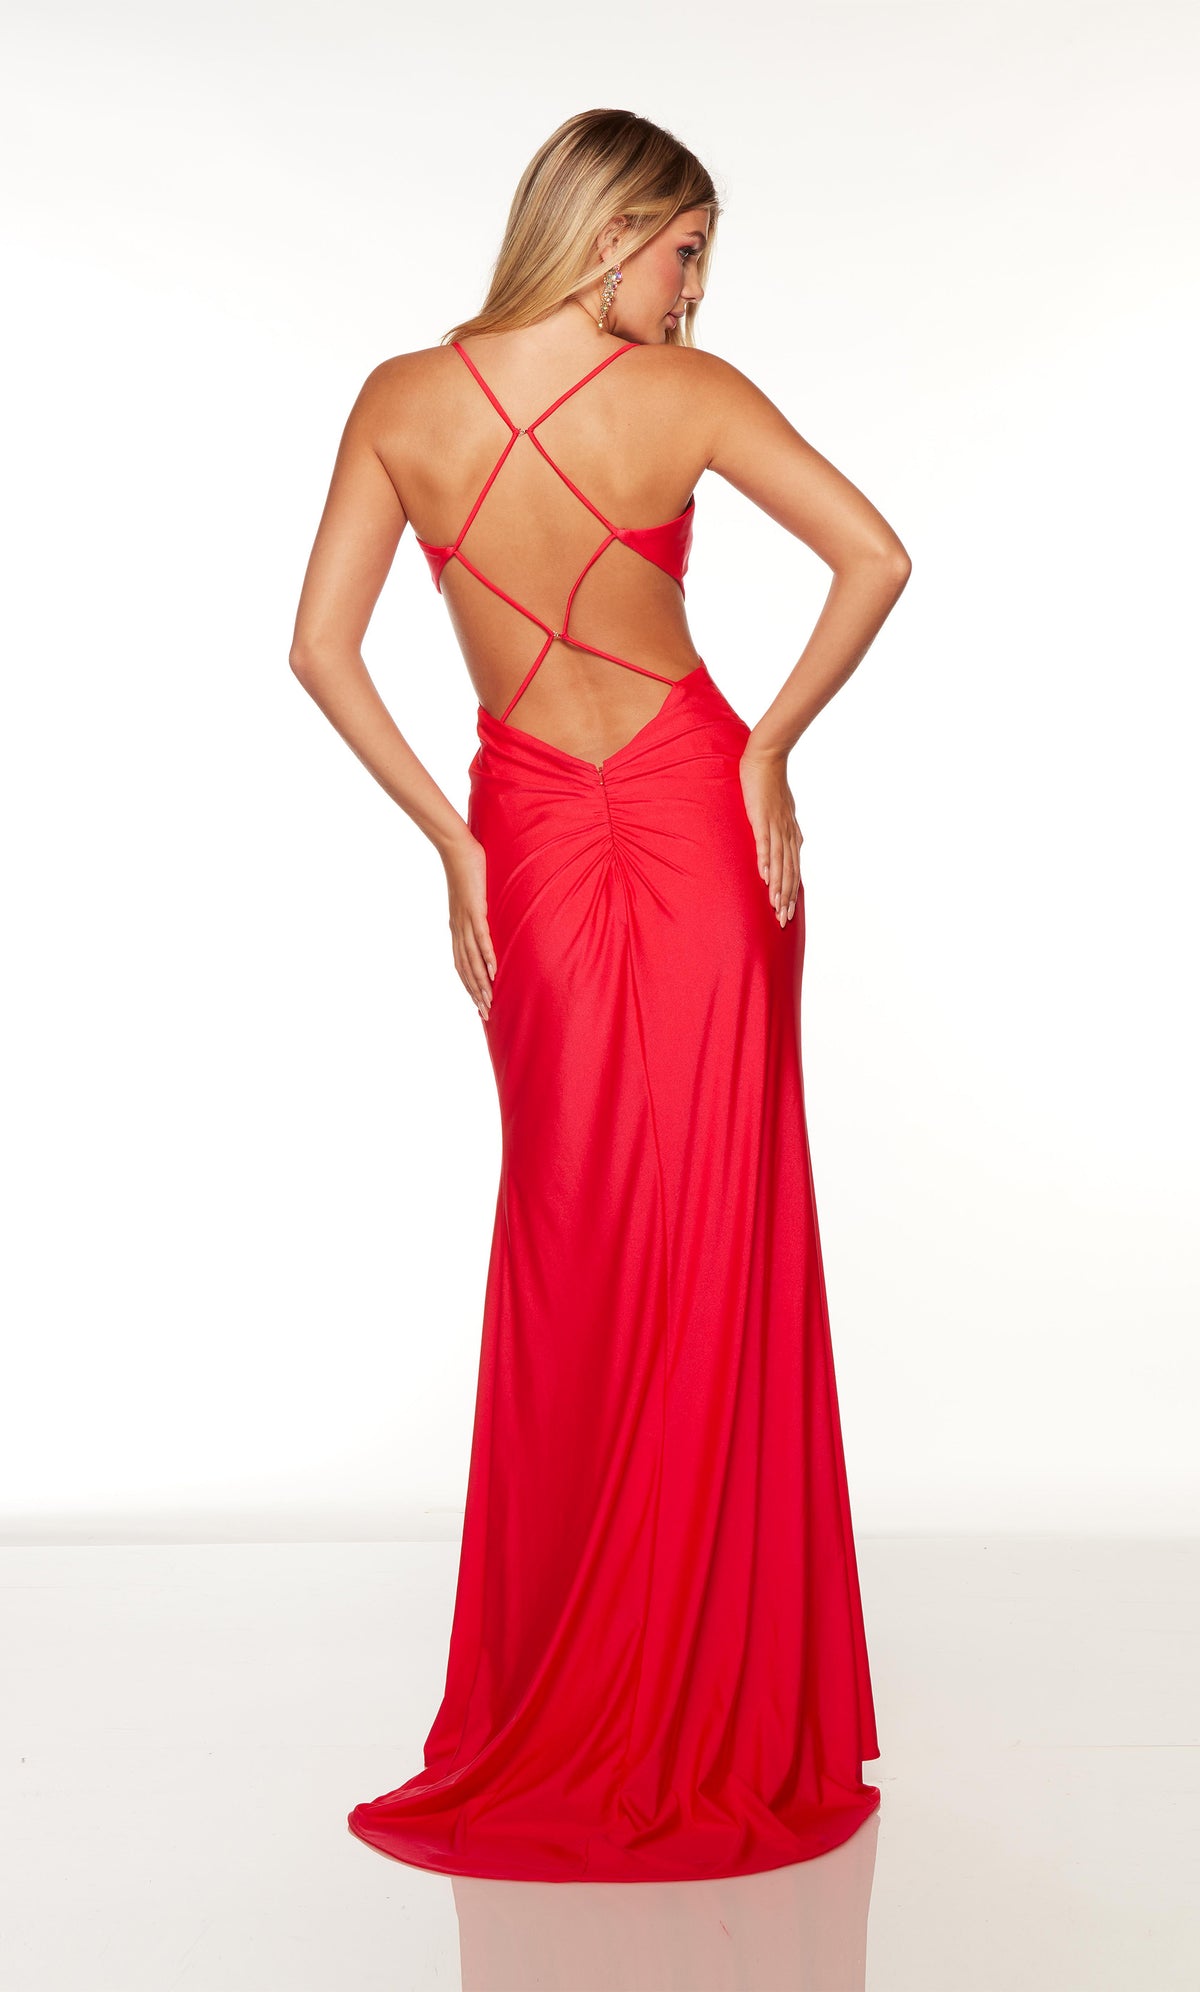 Red prom dress with crisscross back style and train.